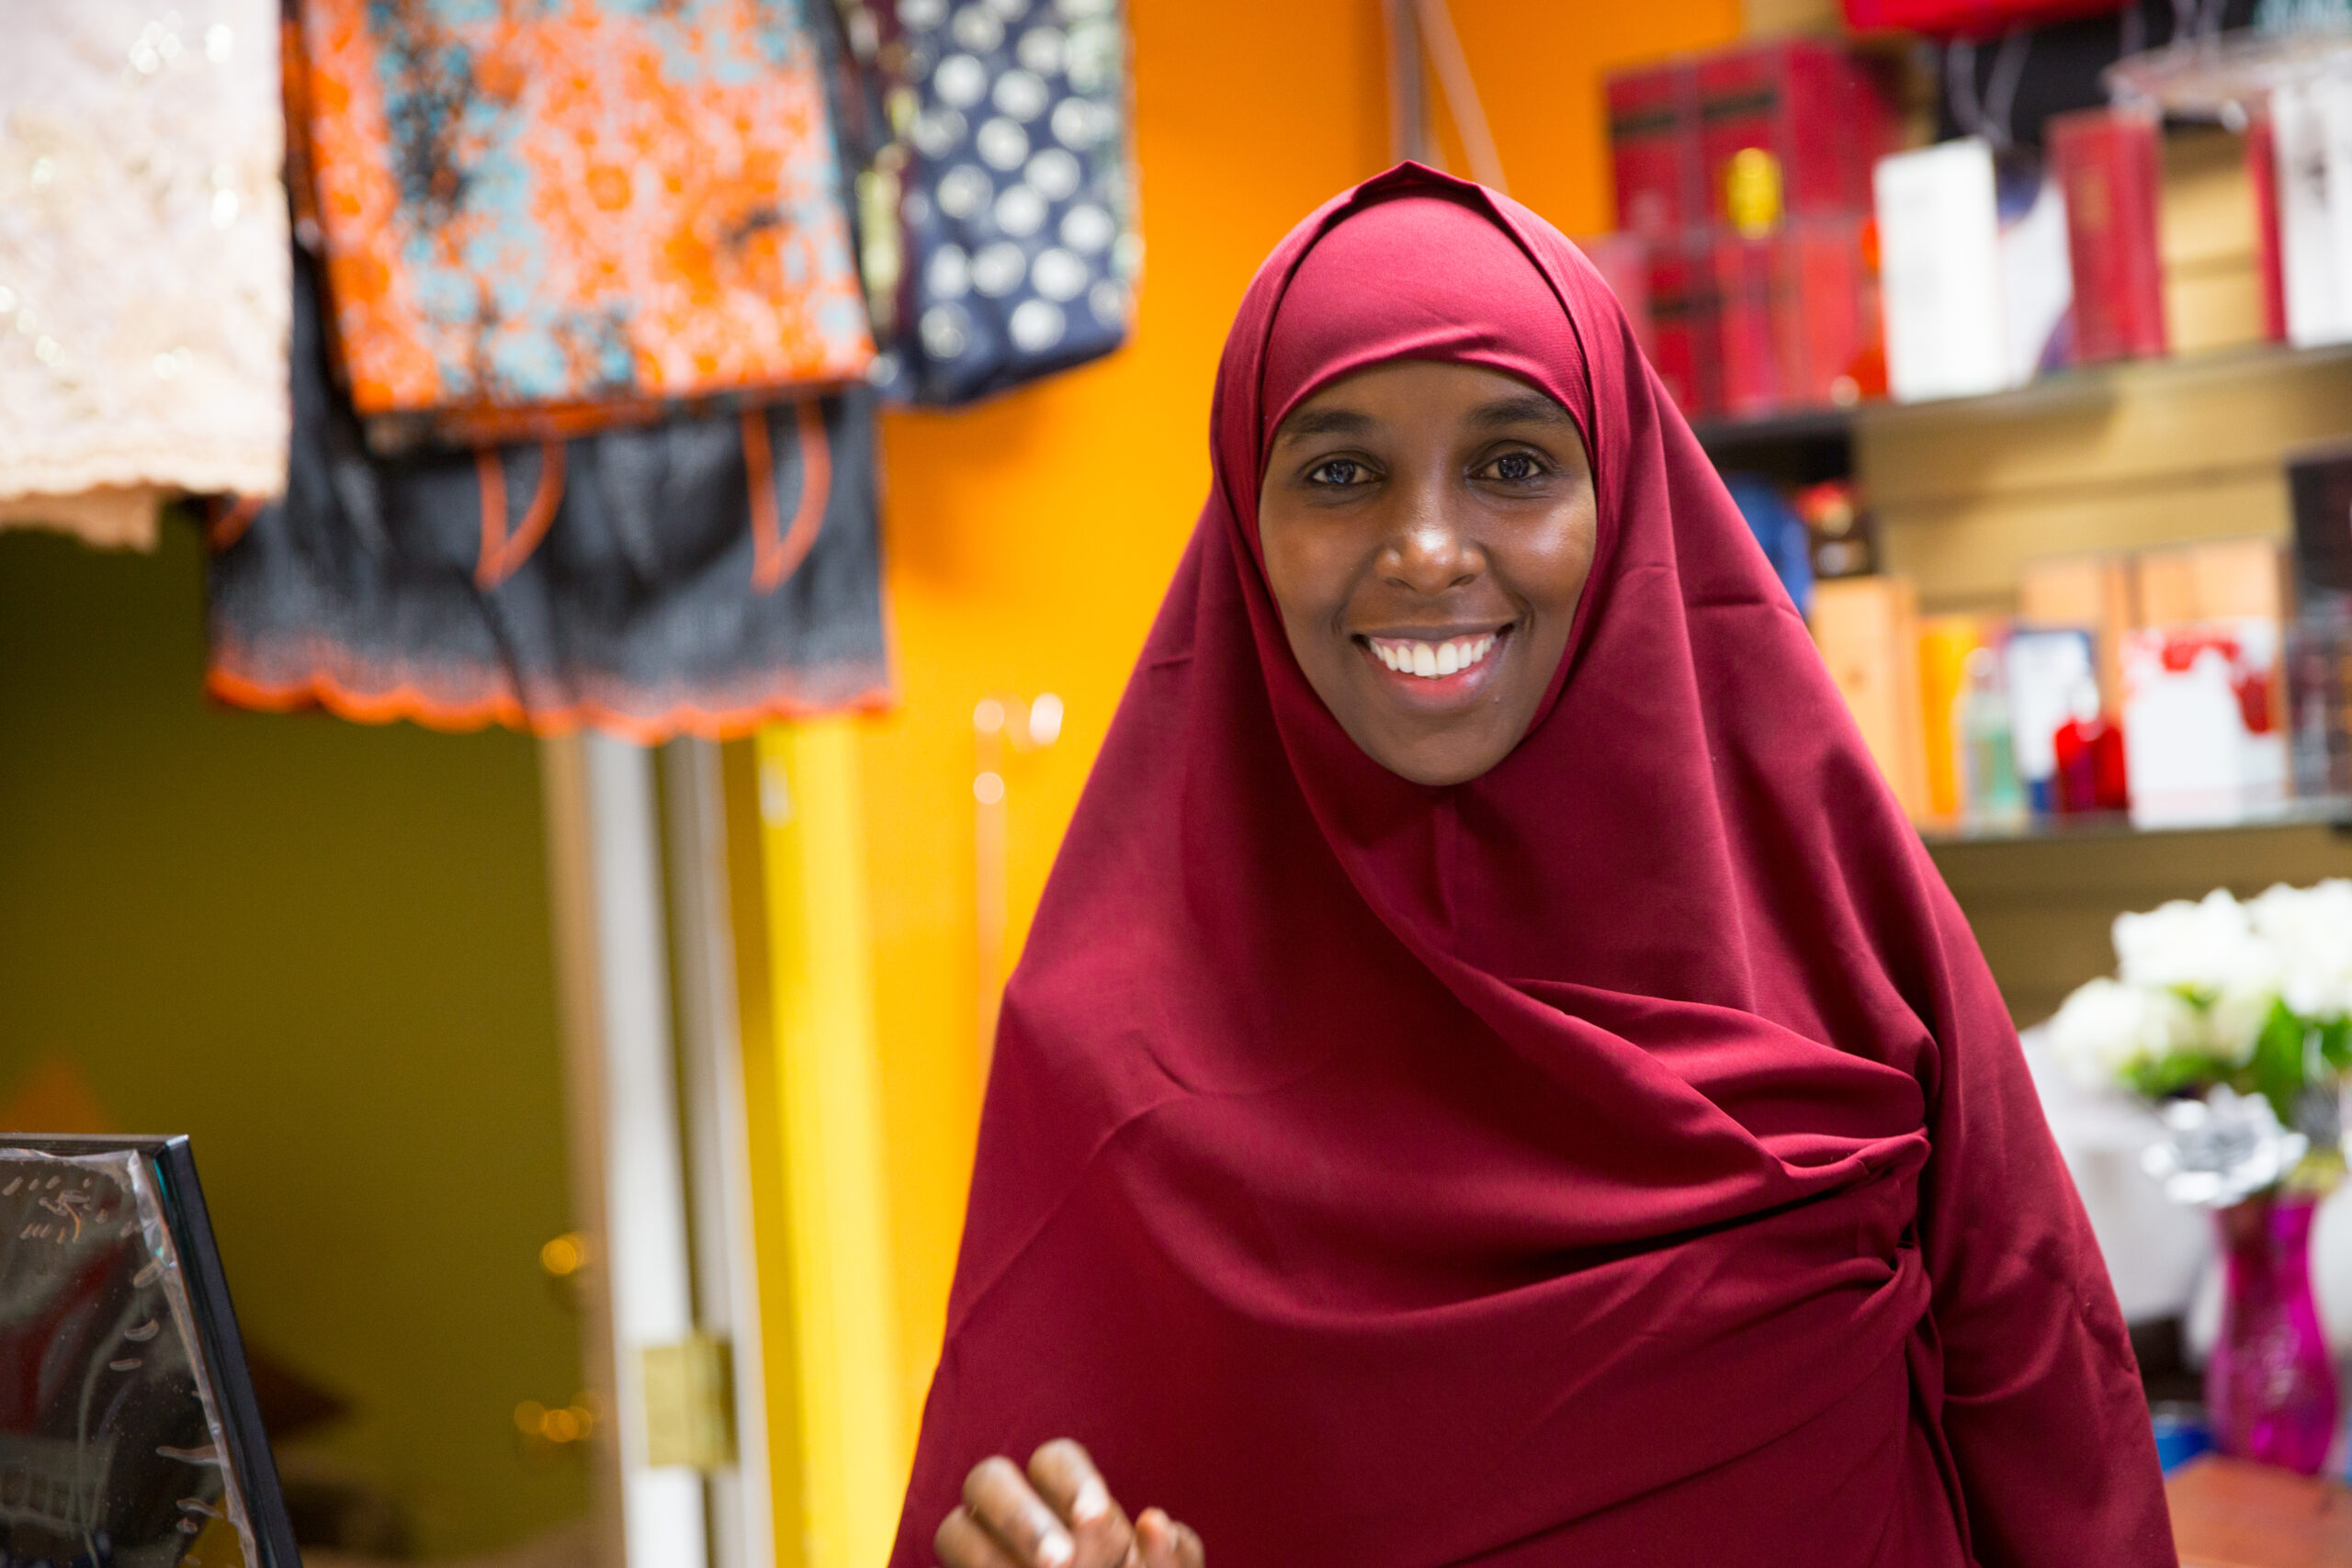 A smiling woman in a red headscarf stands in front of brightly colored store items.